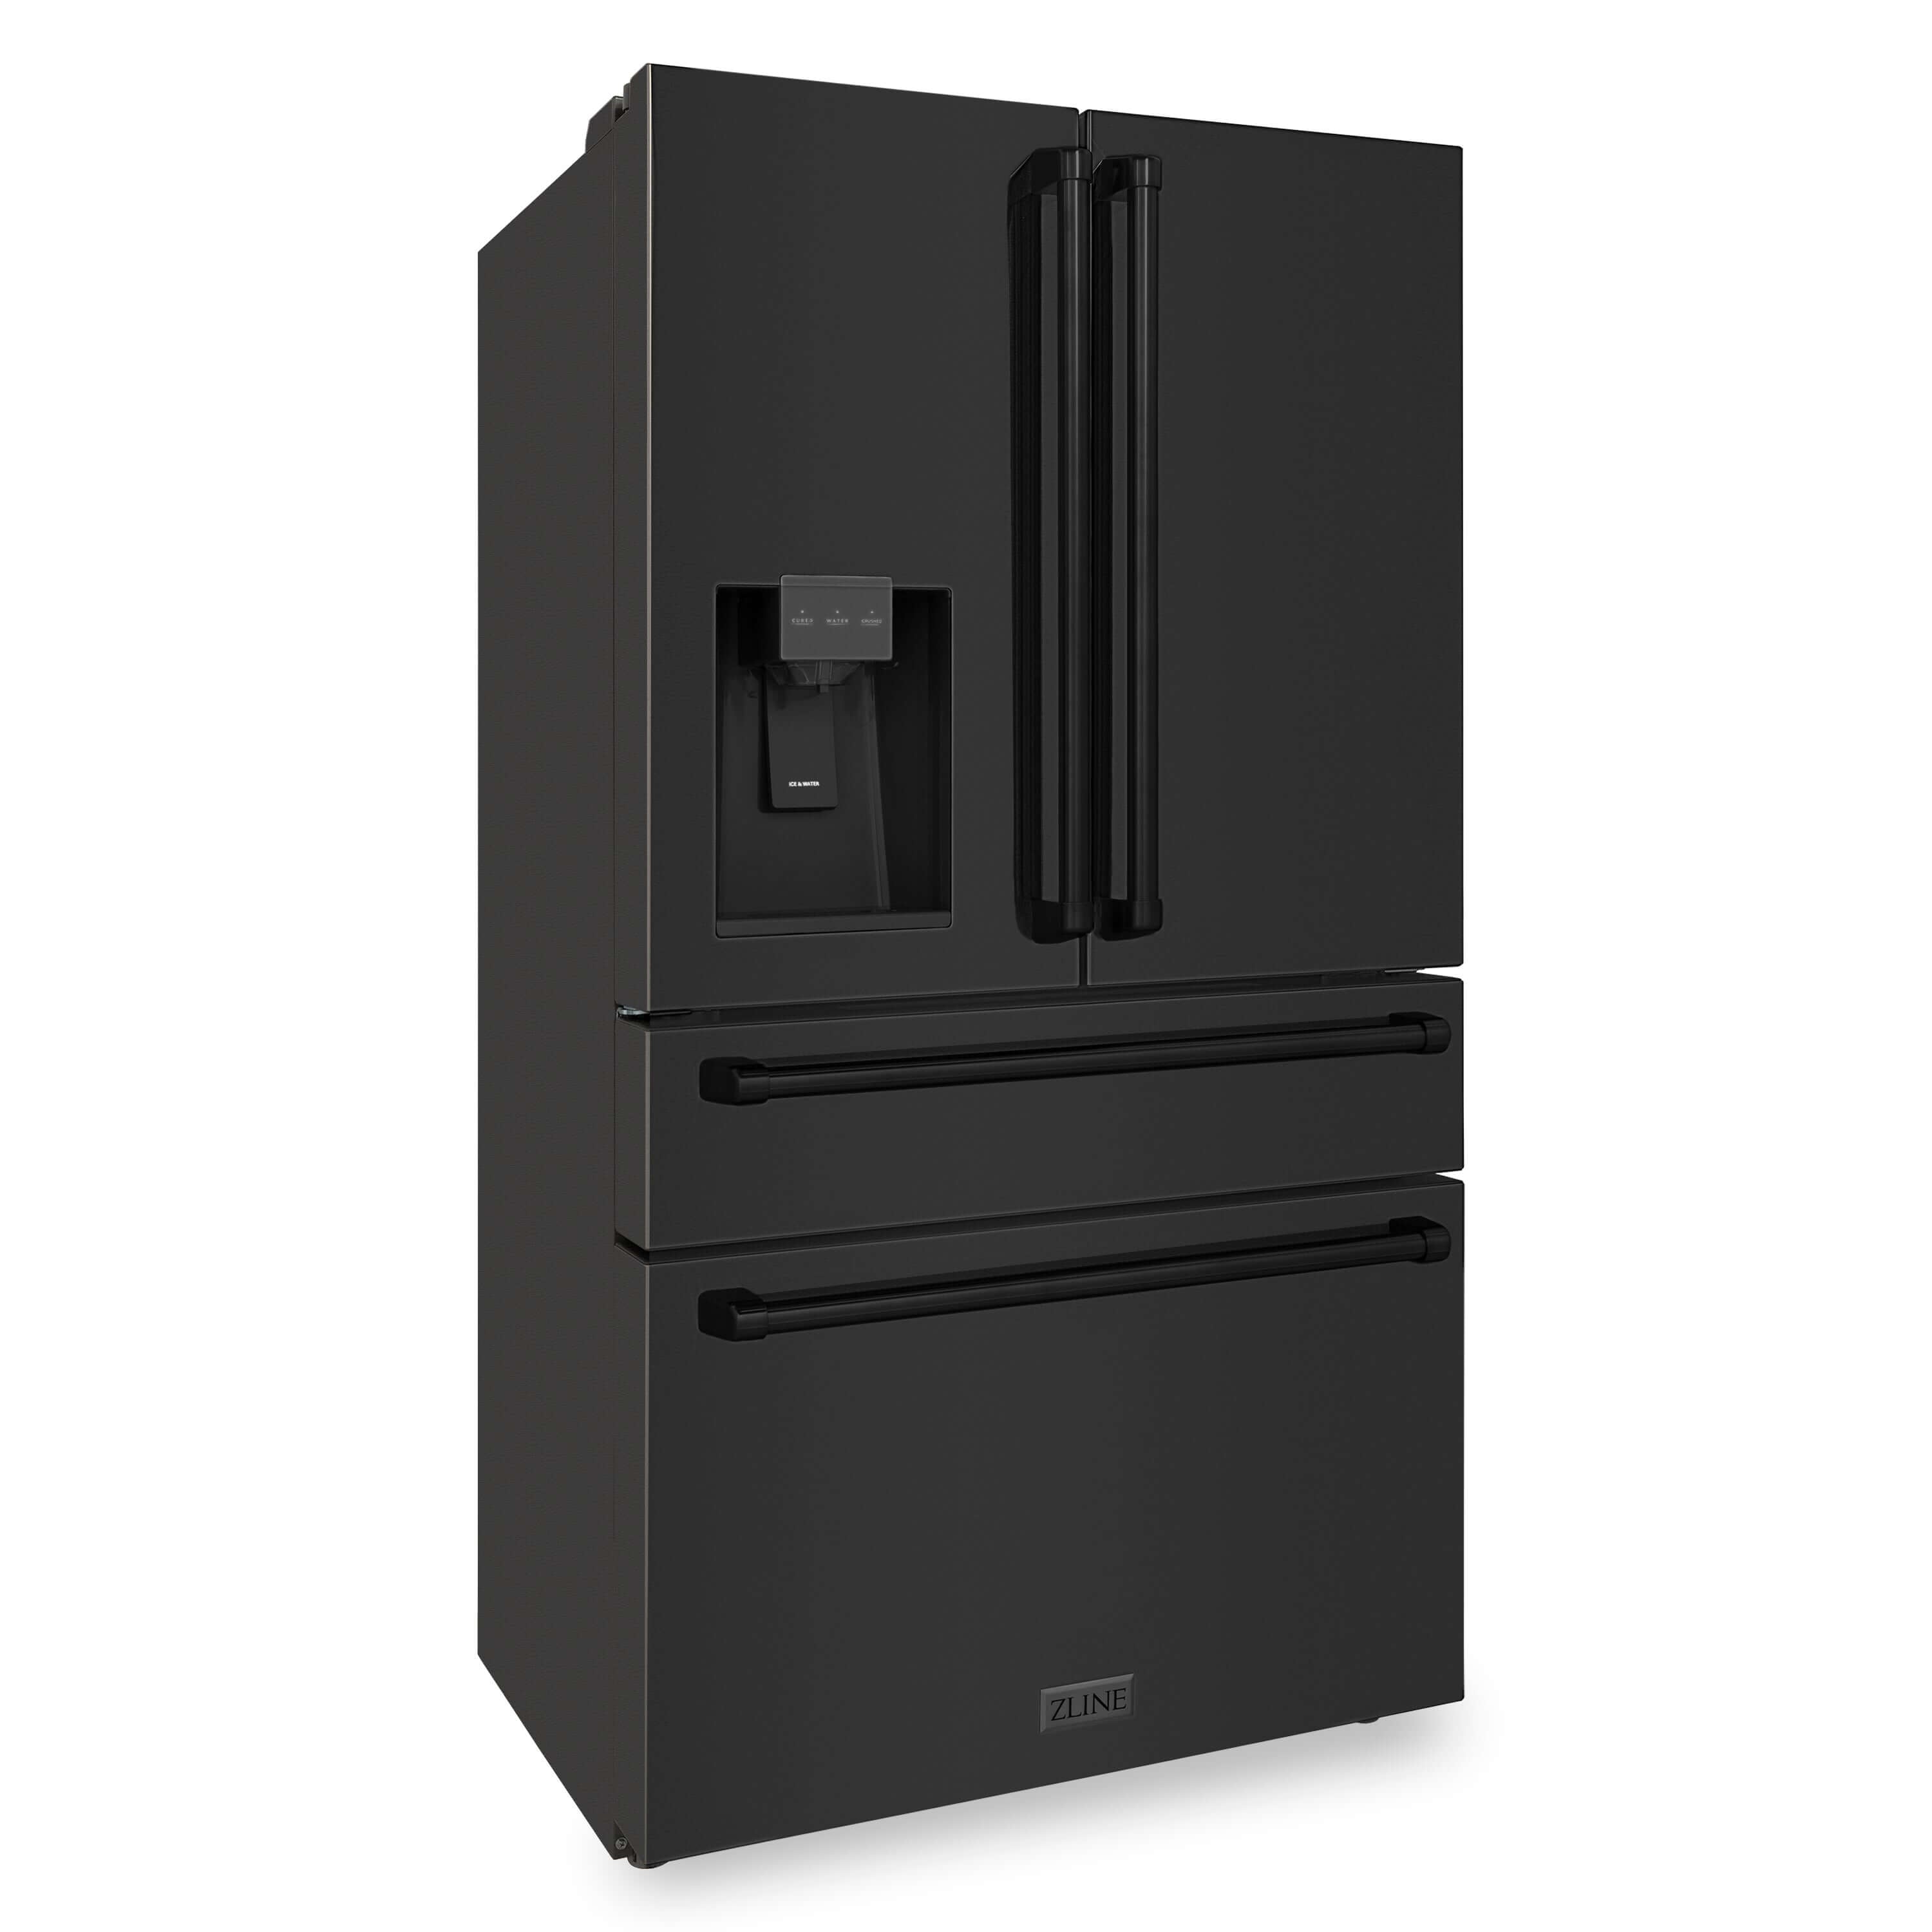 ZLINE 36 in. 21.6 cu. ft Freestanding French Door Fingerprint Resistant Refrigerator with External Water and Ice Dispenser in Black Stainless Steel (RFM-W-36-BS) Side View